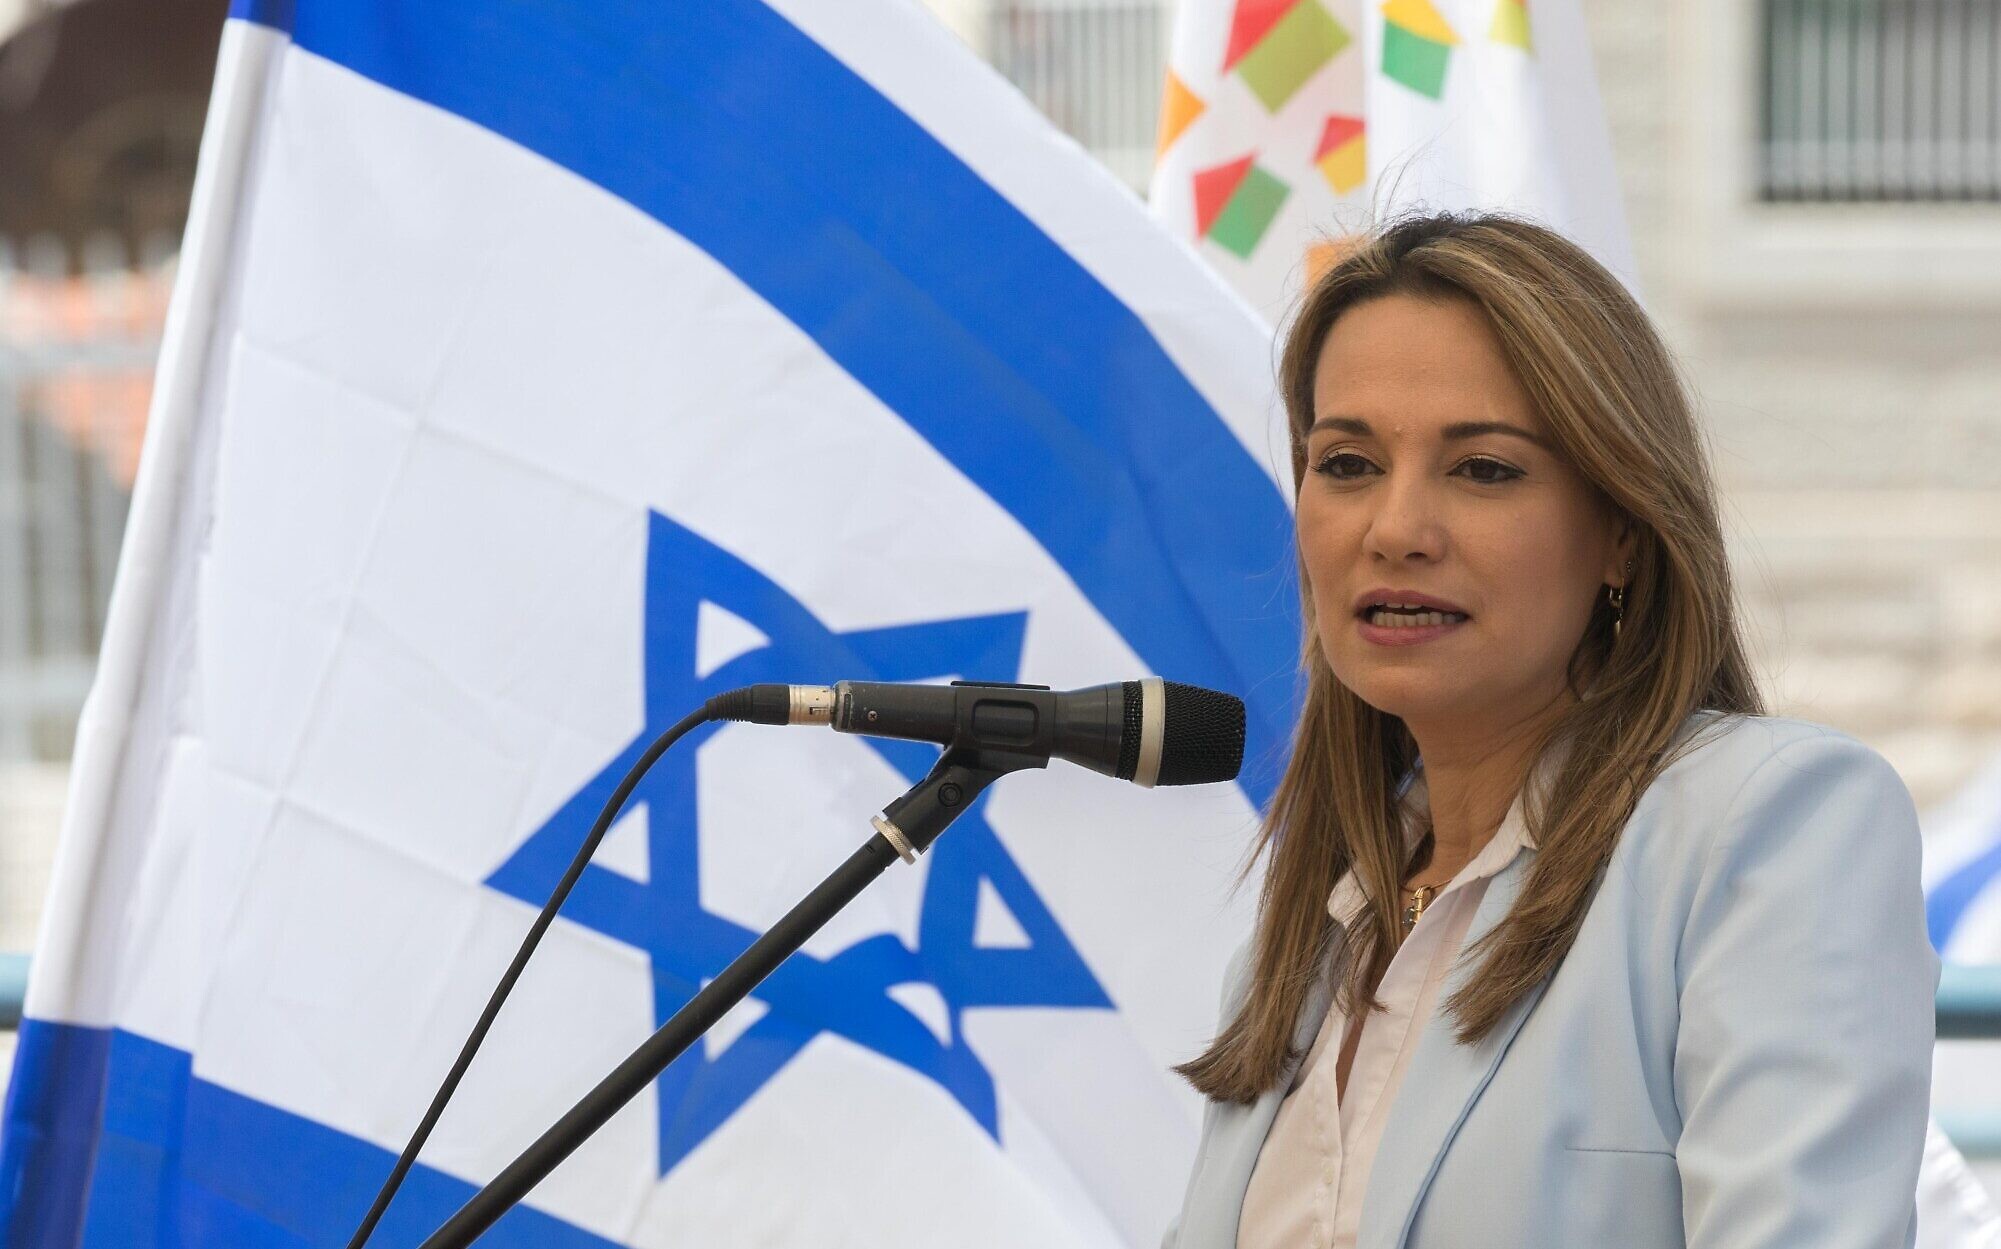 Yifat Shasha-Biton at a Housing Ministry ceremony in Jerusalem on May 18, 2020. (Olivier Fitoussi/Flash90)